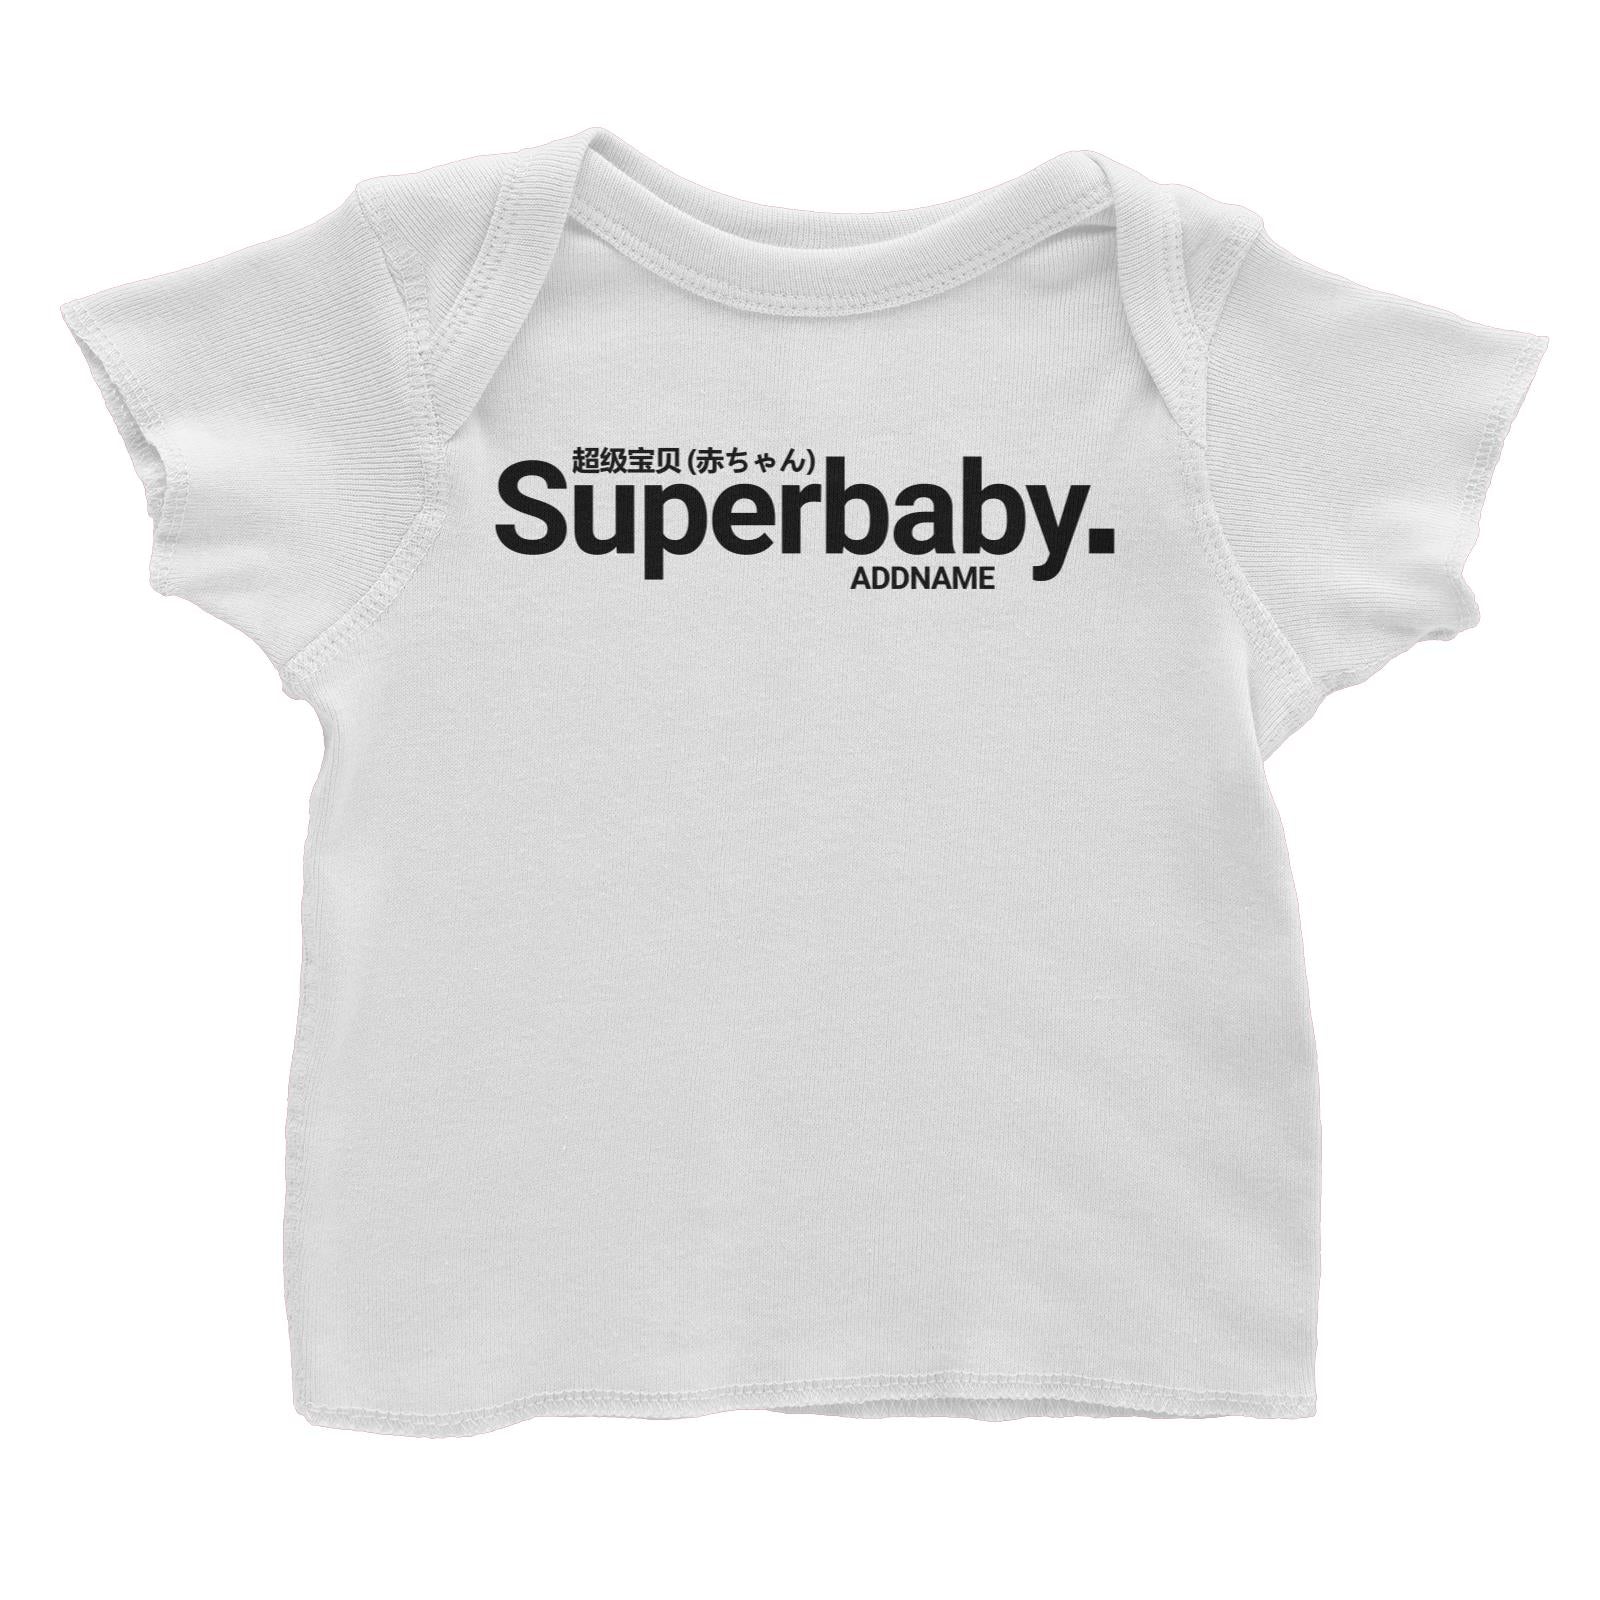 Streetwear Superbaby Addname Baby T-Shirt